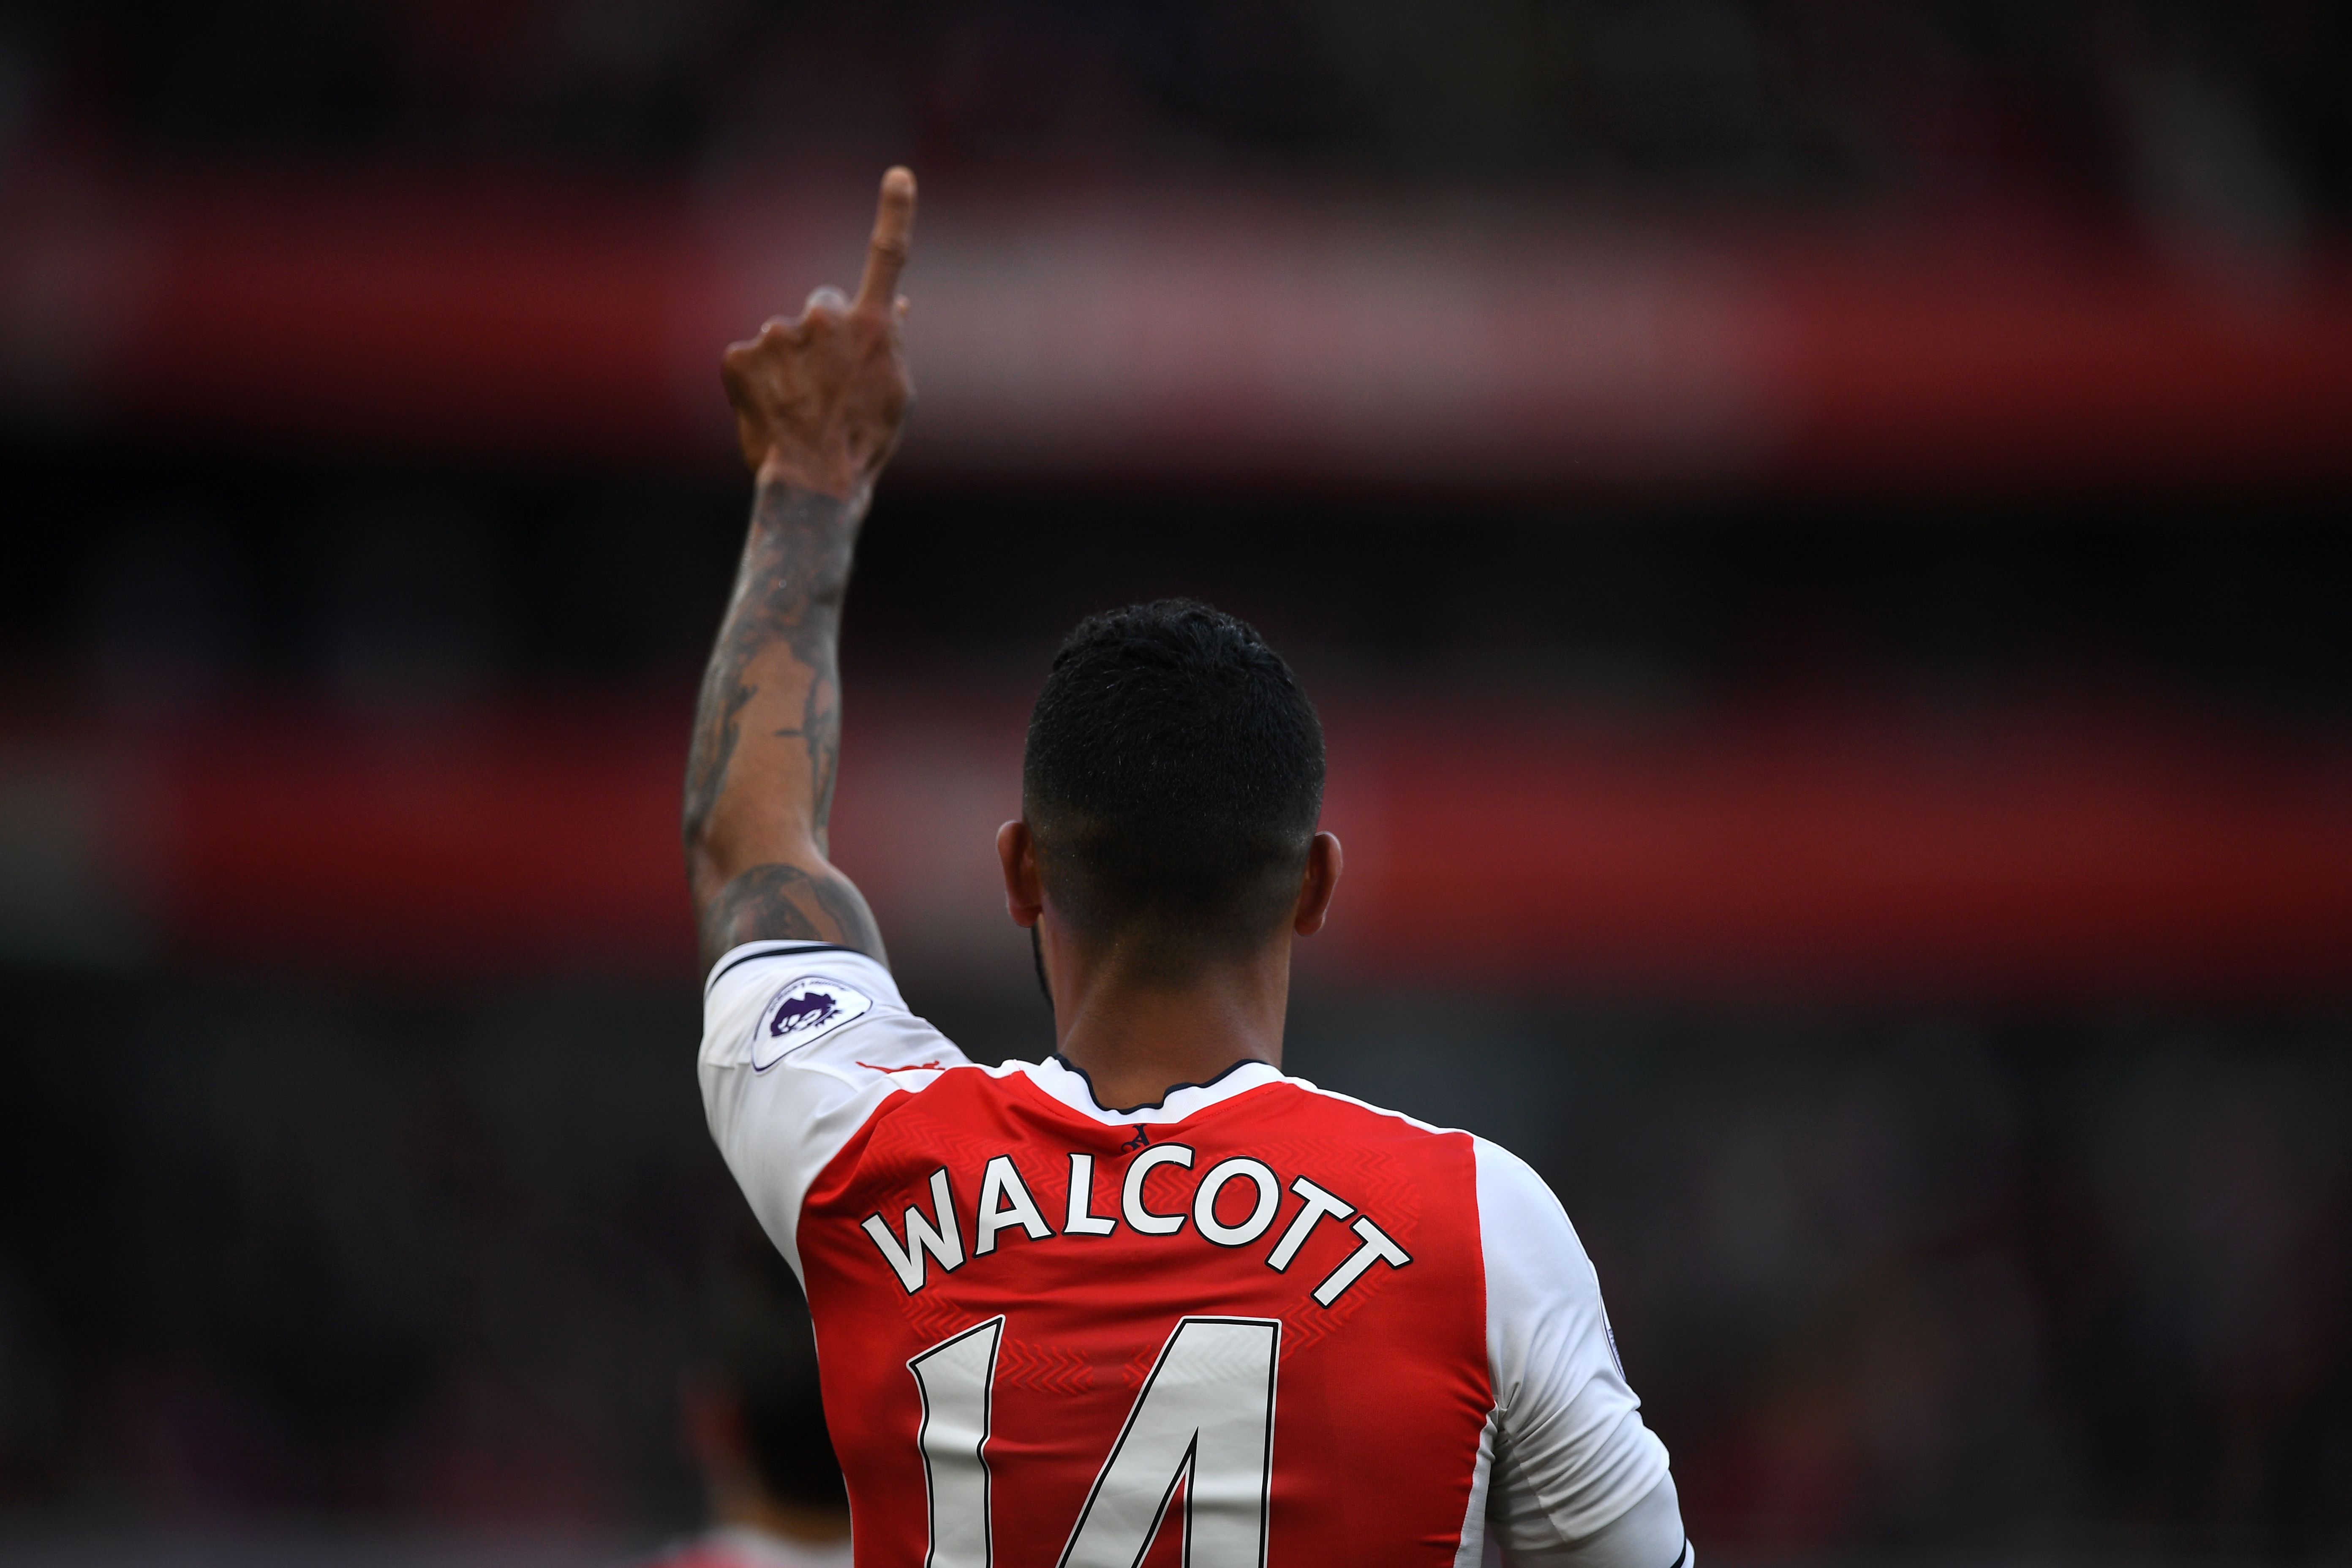 Arsenal's English midfielder Theo Walcott celebrates scoring the opening goal of the English Premier League football match between Arsenal and Swansea City at the Emirates Stadium in London on October 15, 2016. 
Arsenal won the game 3-2. / AFP / Justin TALLIS / RESTRICTED TO EDITORIAL USE. No use with unauthorized audio, video, data, fixture lists, club/league logos or 'live' services. Online in-match use limited to 75 images, no video emulation. No use in betting, games or single club/league/player publications.  /         (Photo credit should read JUSTIN TALLIS/AFP/Getty Images)